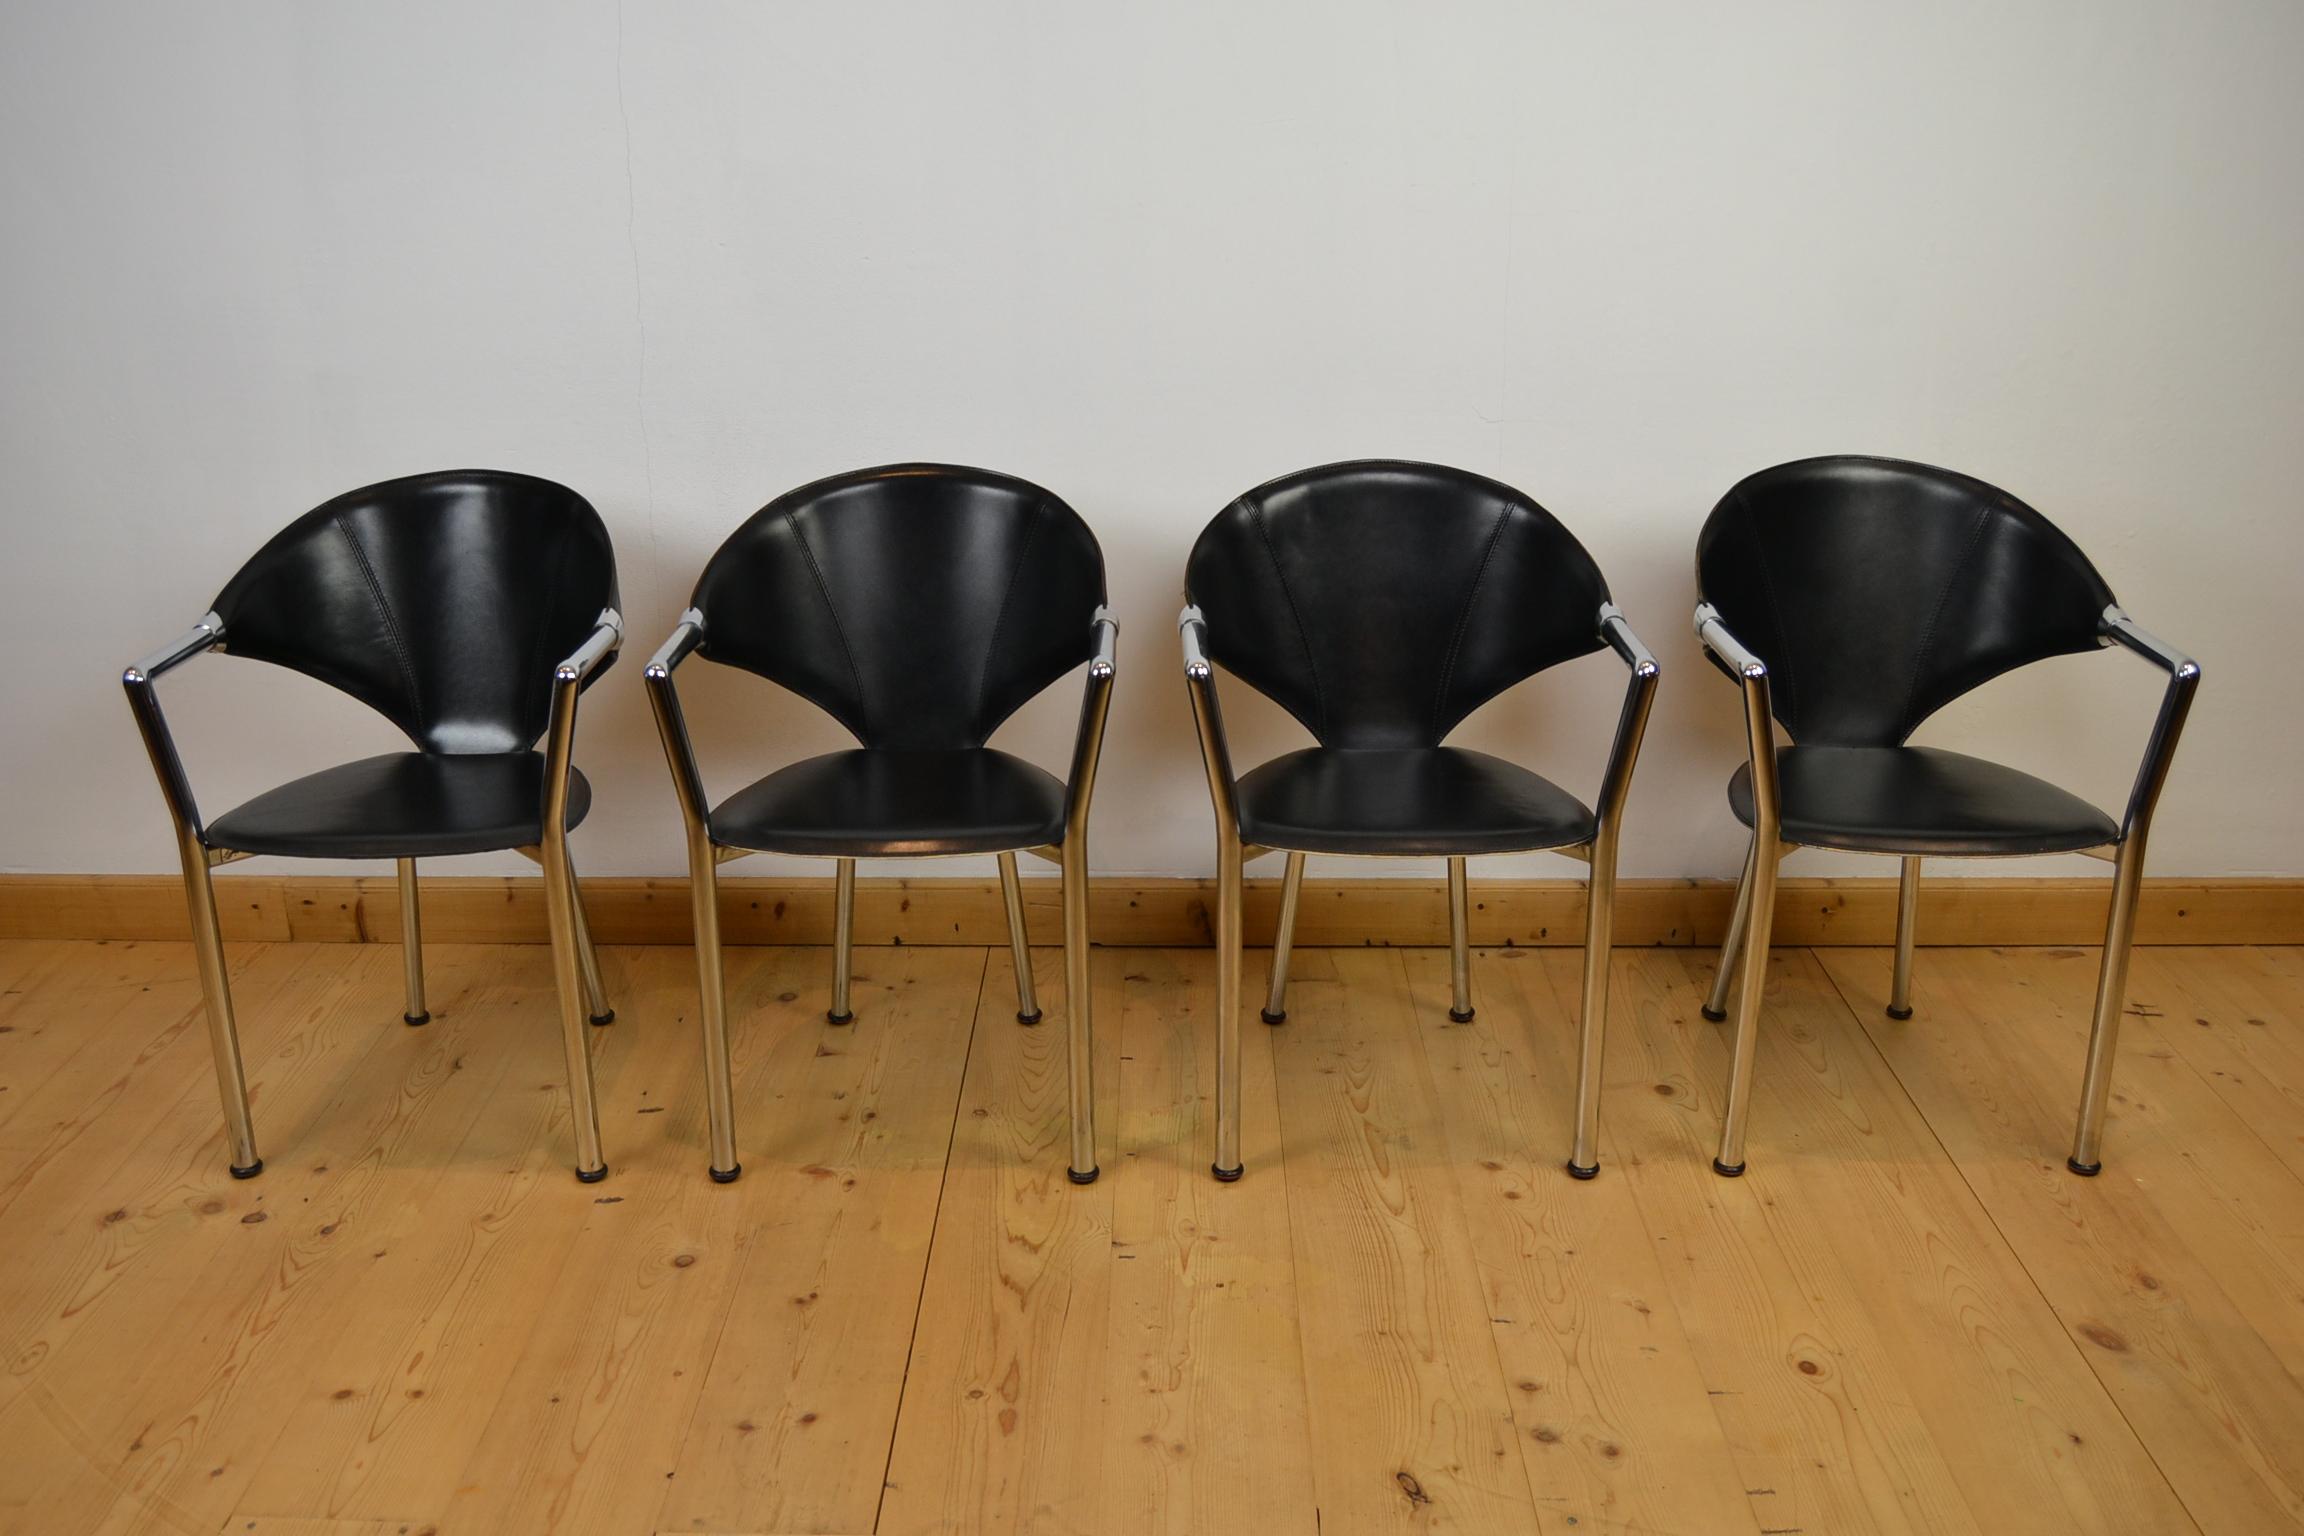 Set of 4 stylish black modern chairs.
These vintage Italian chairs by Segis Italy date from the late 1970s-1980s.
Dining chairs - Office chairs - Armchairs with black leather seats and a chromed frame.
Nice shape and stitching.
In good vintage